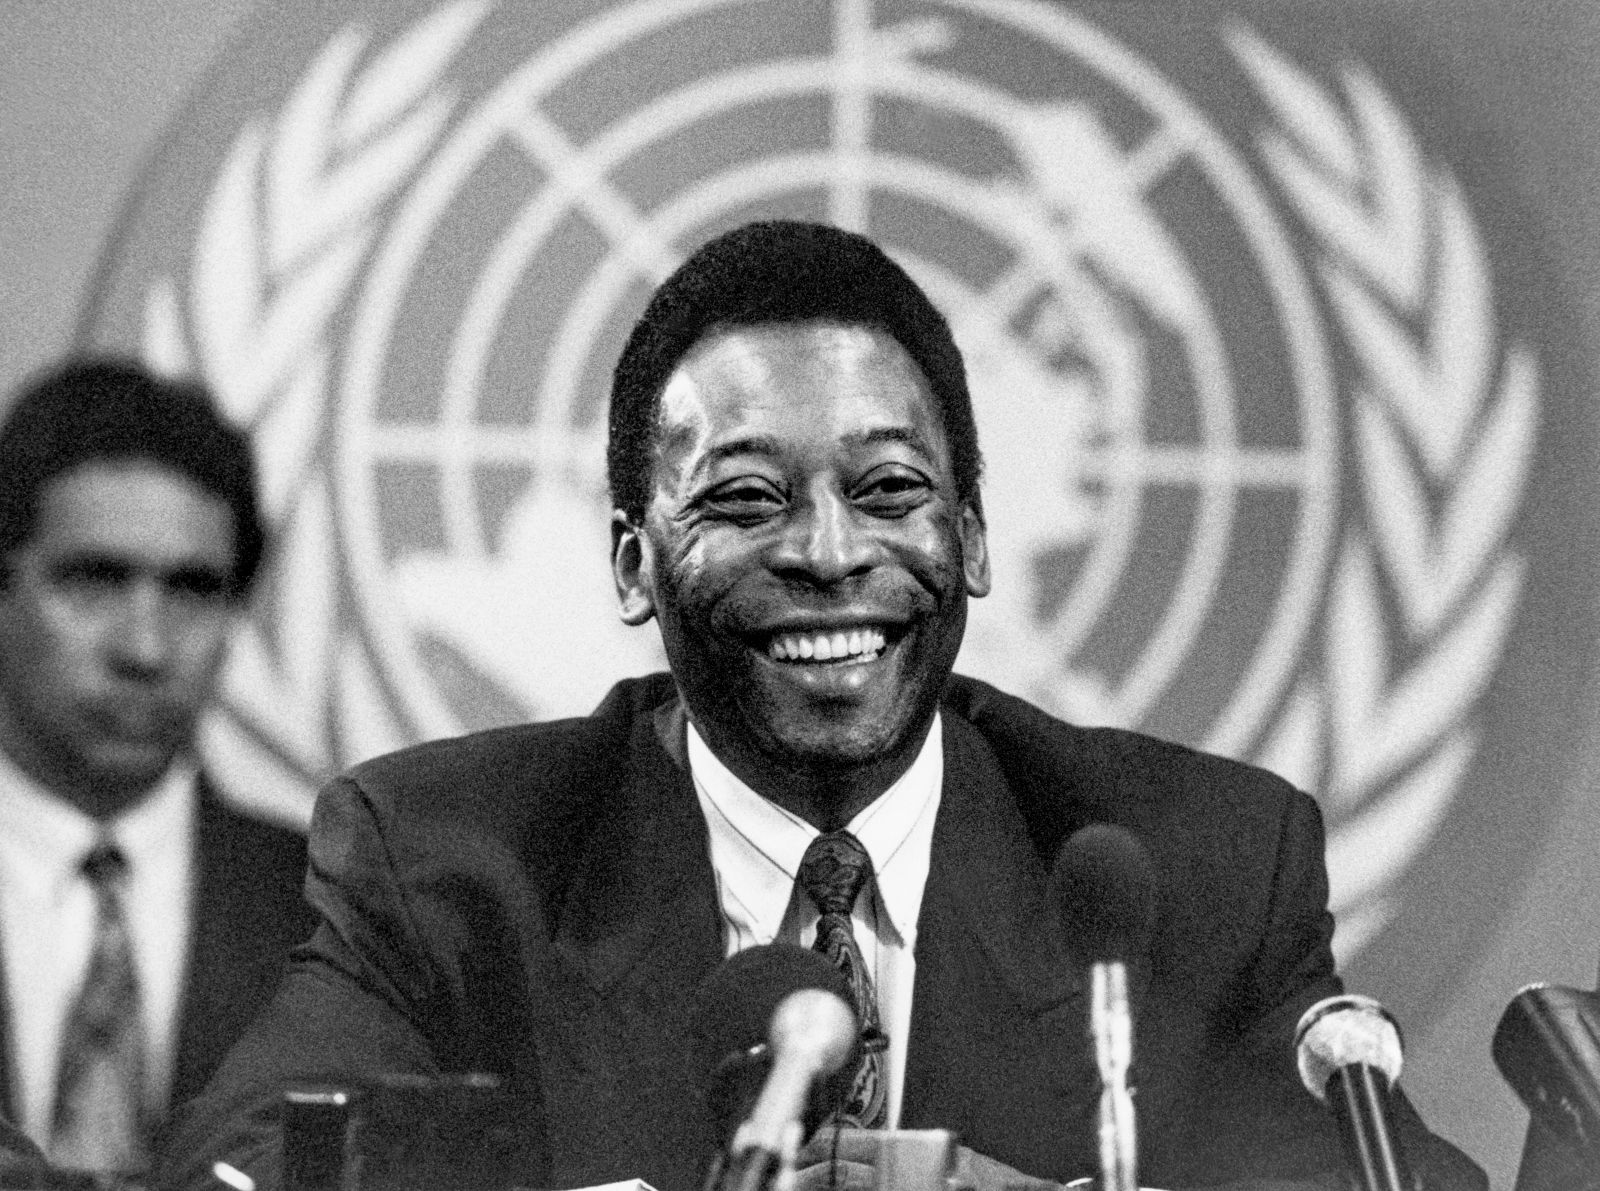 epa10382398 (FILE) - Brazilian soccer legend Pele, whos birth name is Edson Arantes do Nascimento, the new 'ambassador of goodwill' of the UN organisation 'Conference of the United Nations on Environment and Development'' or UNCED, speaks at a press conference at the Palais des Nations in Geneva, Switzerland, 05 September 1991 (issued 30 December 2022). According to his agent, Pele, whose proper name is Edson Arantes do Nascimento, died on 28 December 2022 at age 82.  EPA/STR